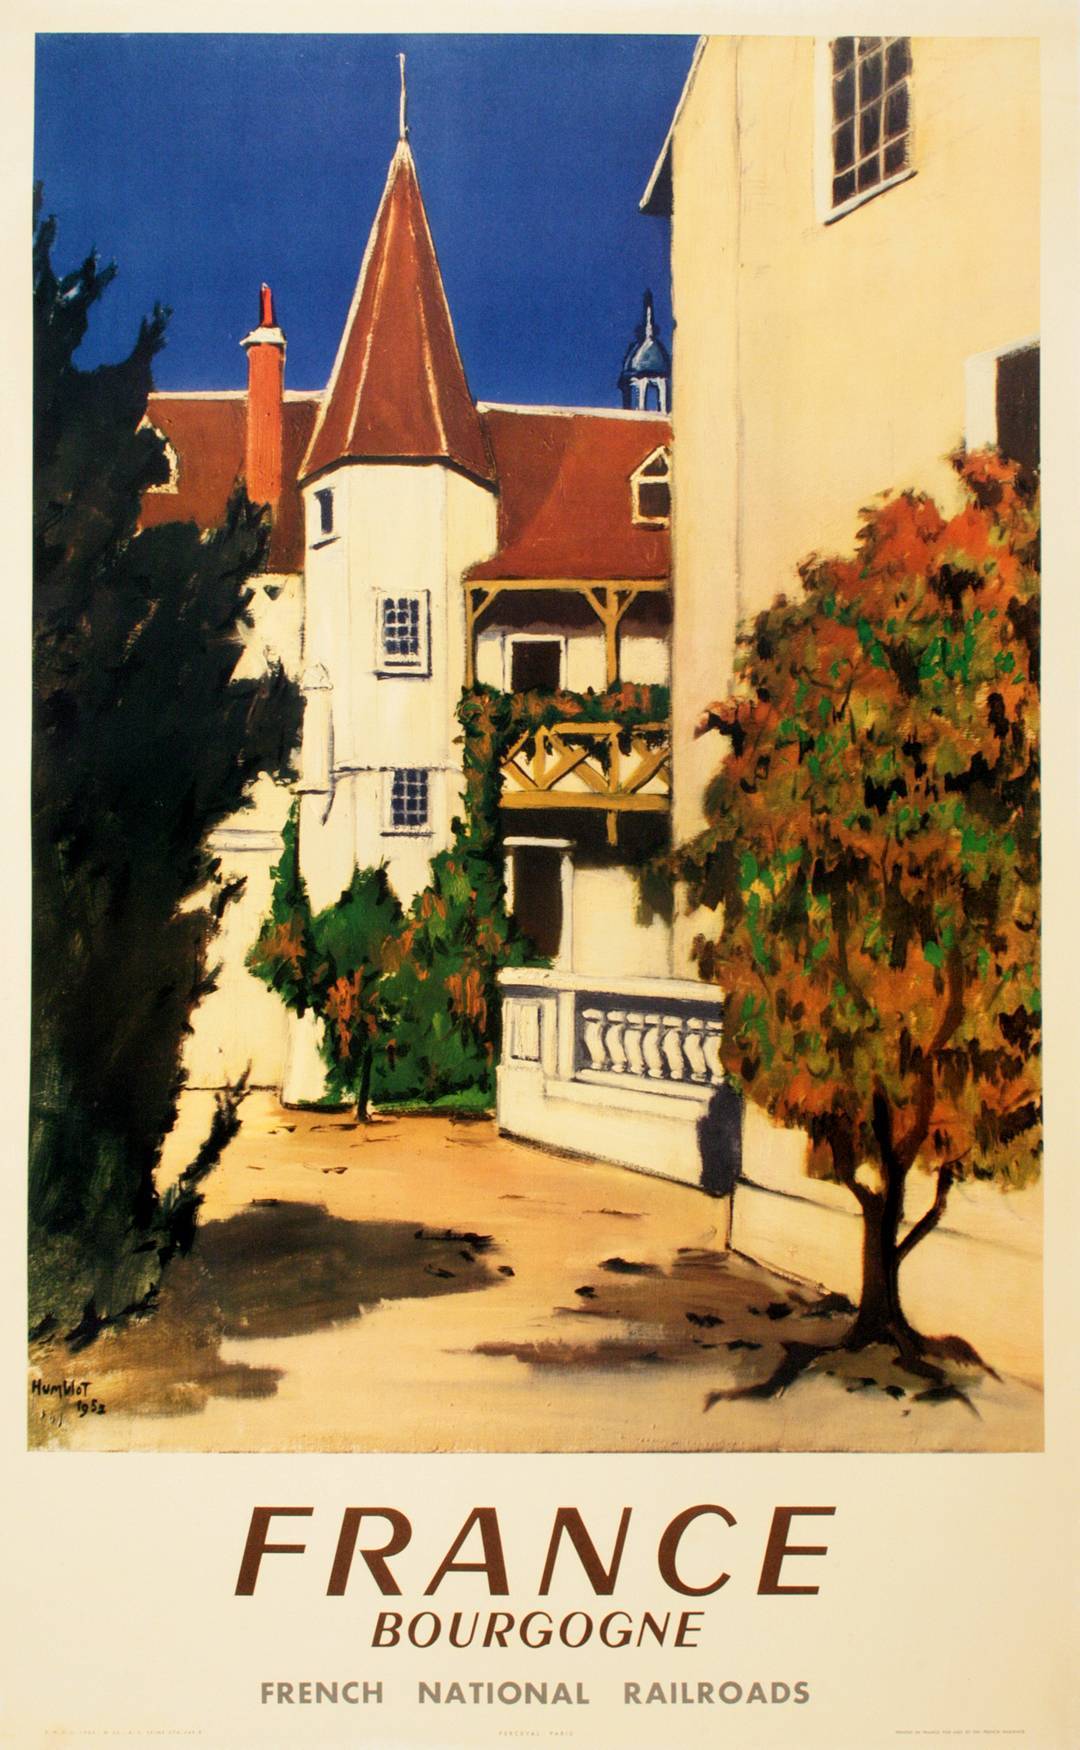 Original 1952 French Railways Poster for Bourgogne by Humboldt